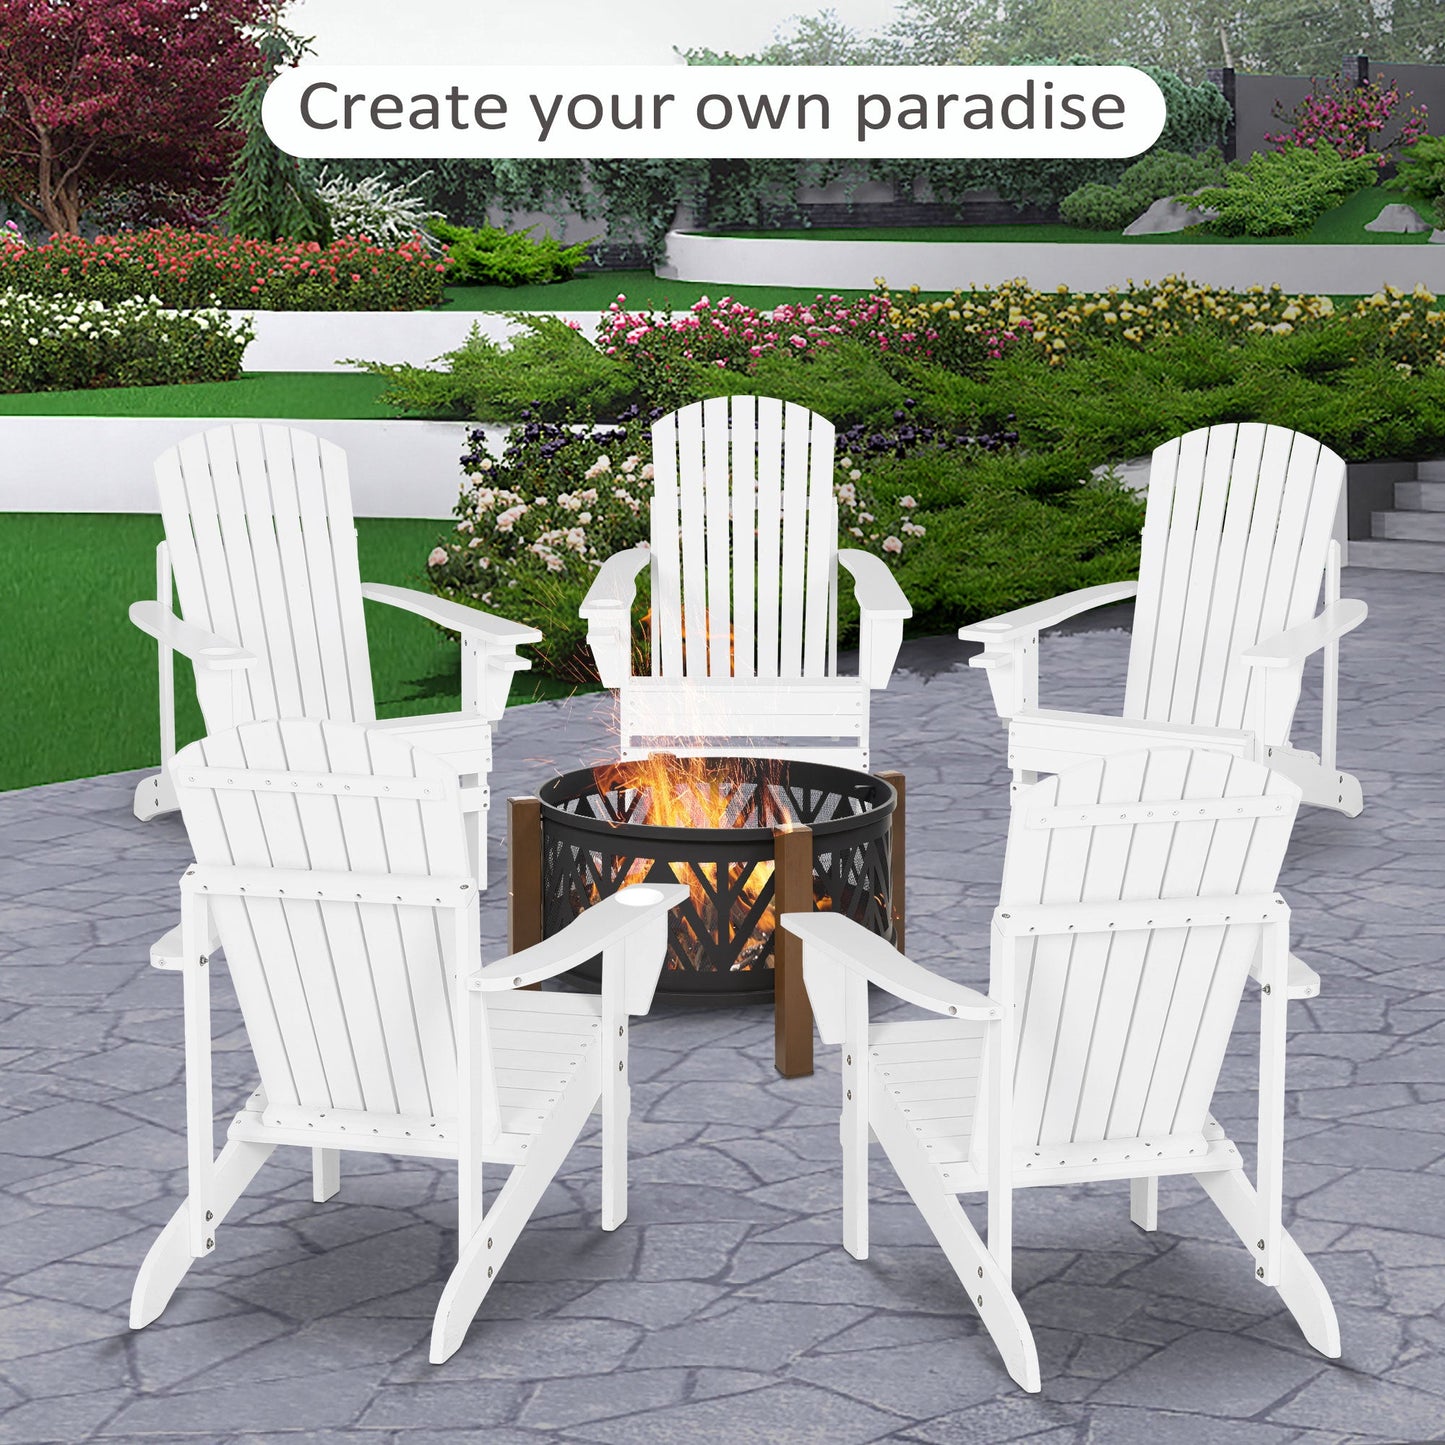 Outdoor and Garden-Wooden Adirondack Chair Outdoor Fire Pit Seating, Classic Lounge Chair with Ergonomic Design & a Built-In Cup Holder for Patio, White - Outdoor Style Company